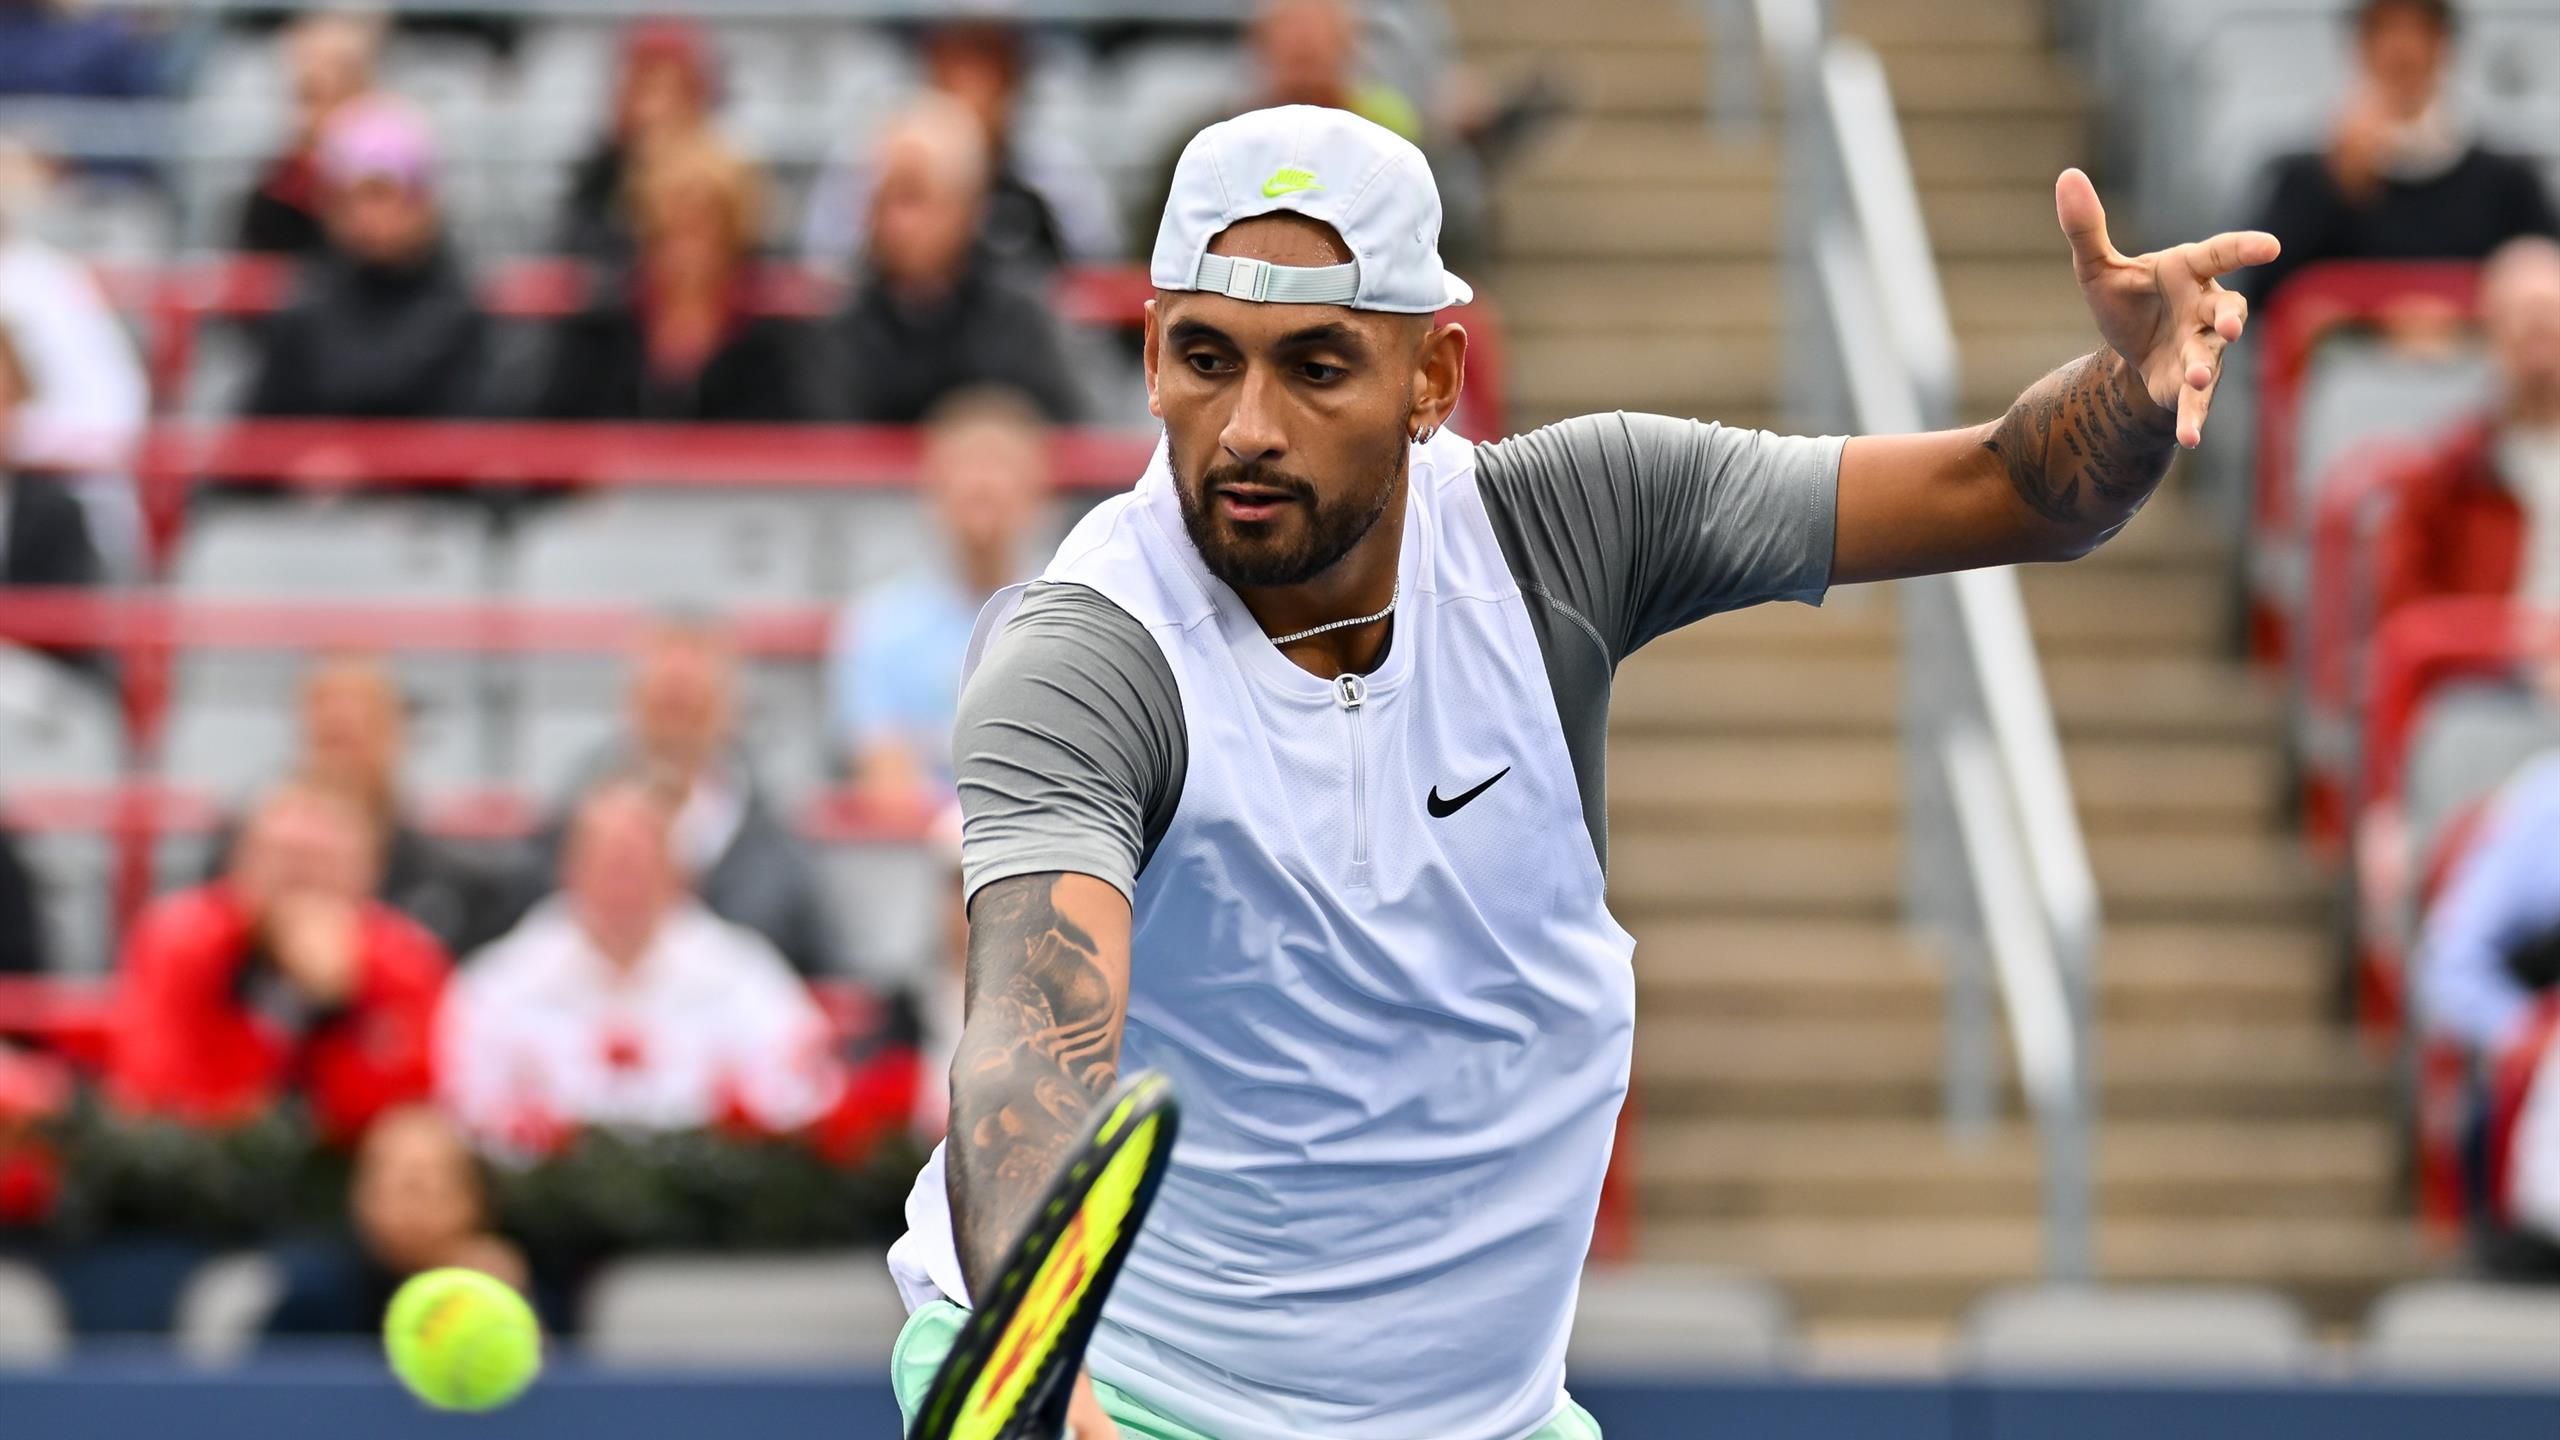 Nick Kyrgios gives hope of a big comeback after missing all four Grand Slams - I still have some fire left